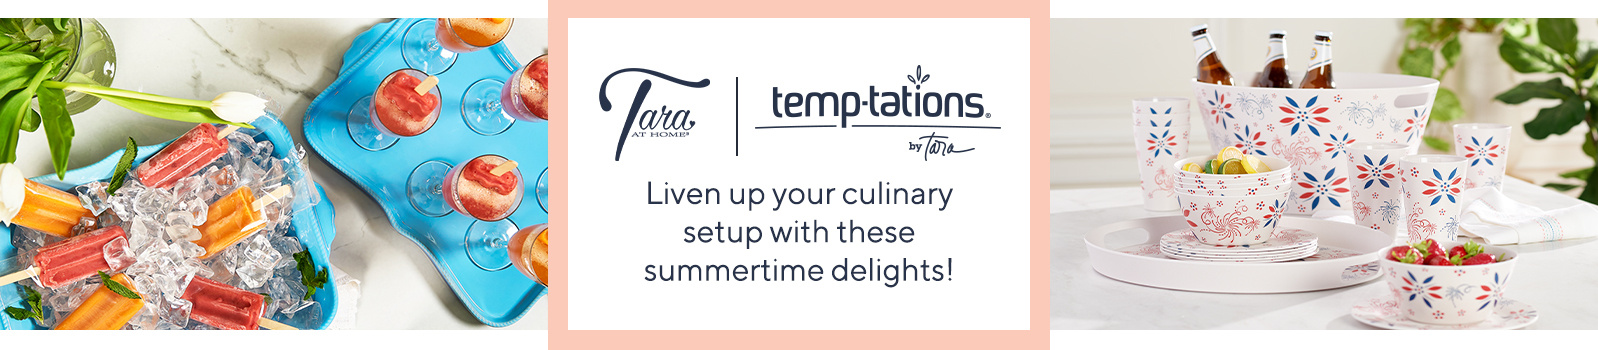 Temp-tations® & Tara at Home®  Liven up your culinary setup with these summertime delights!